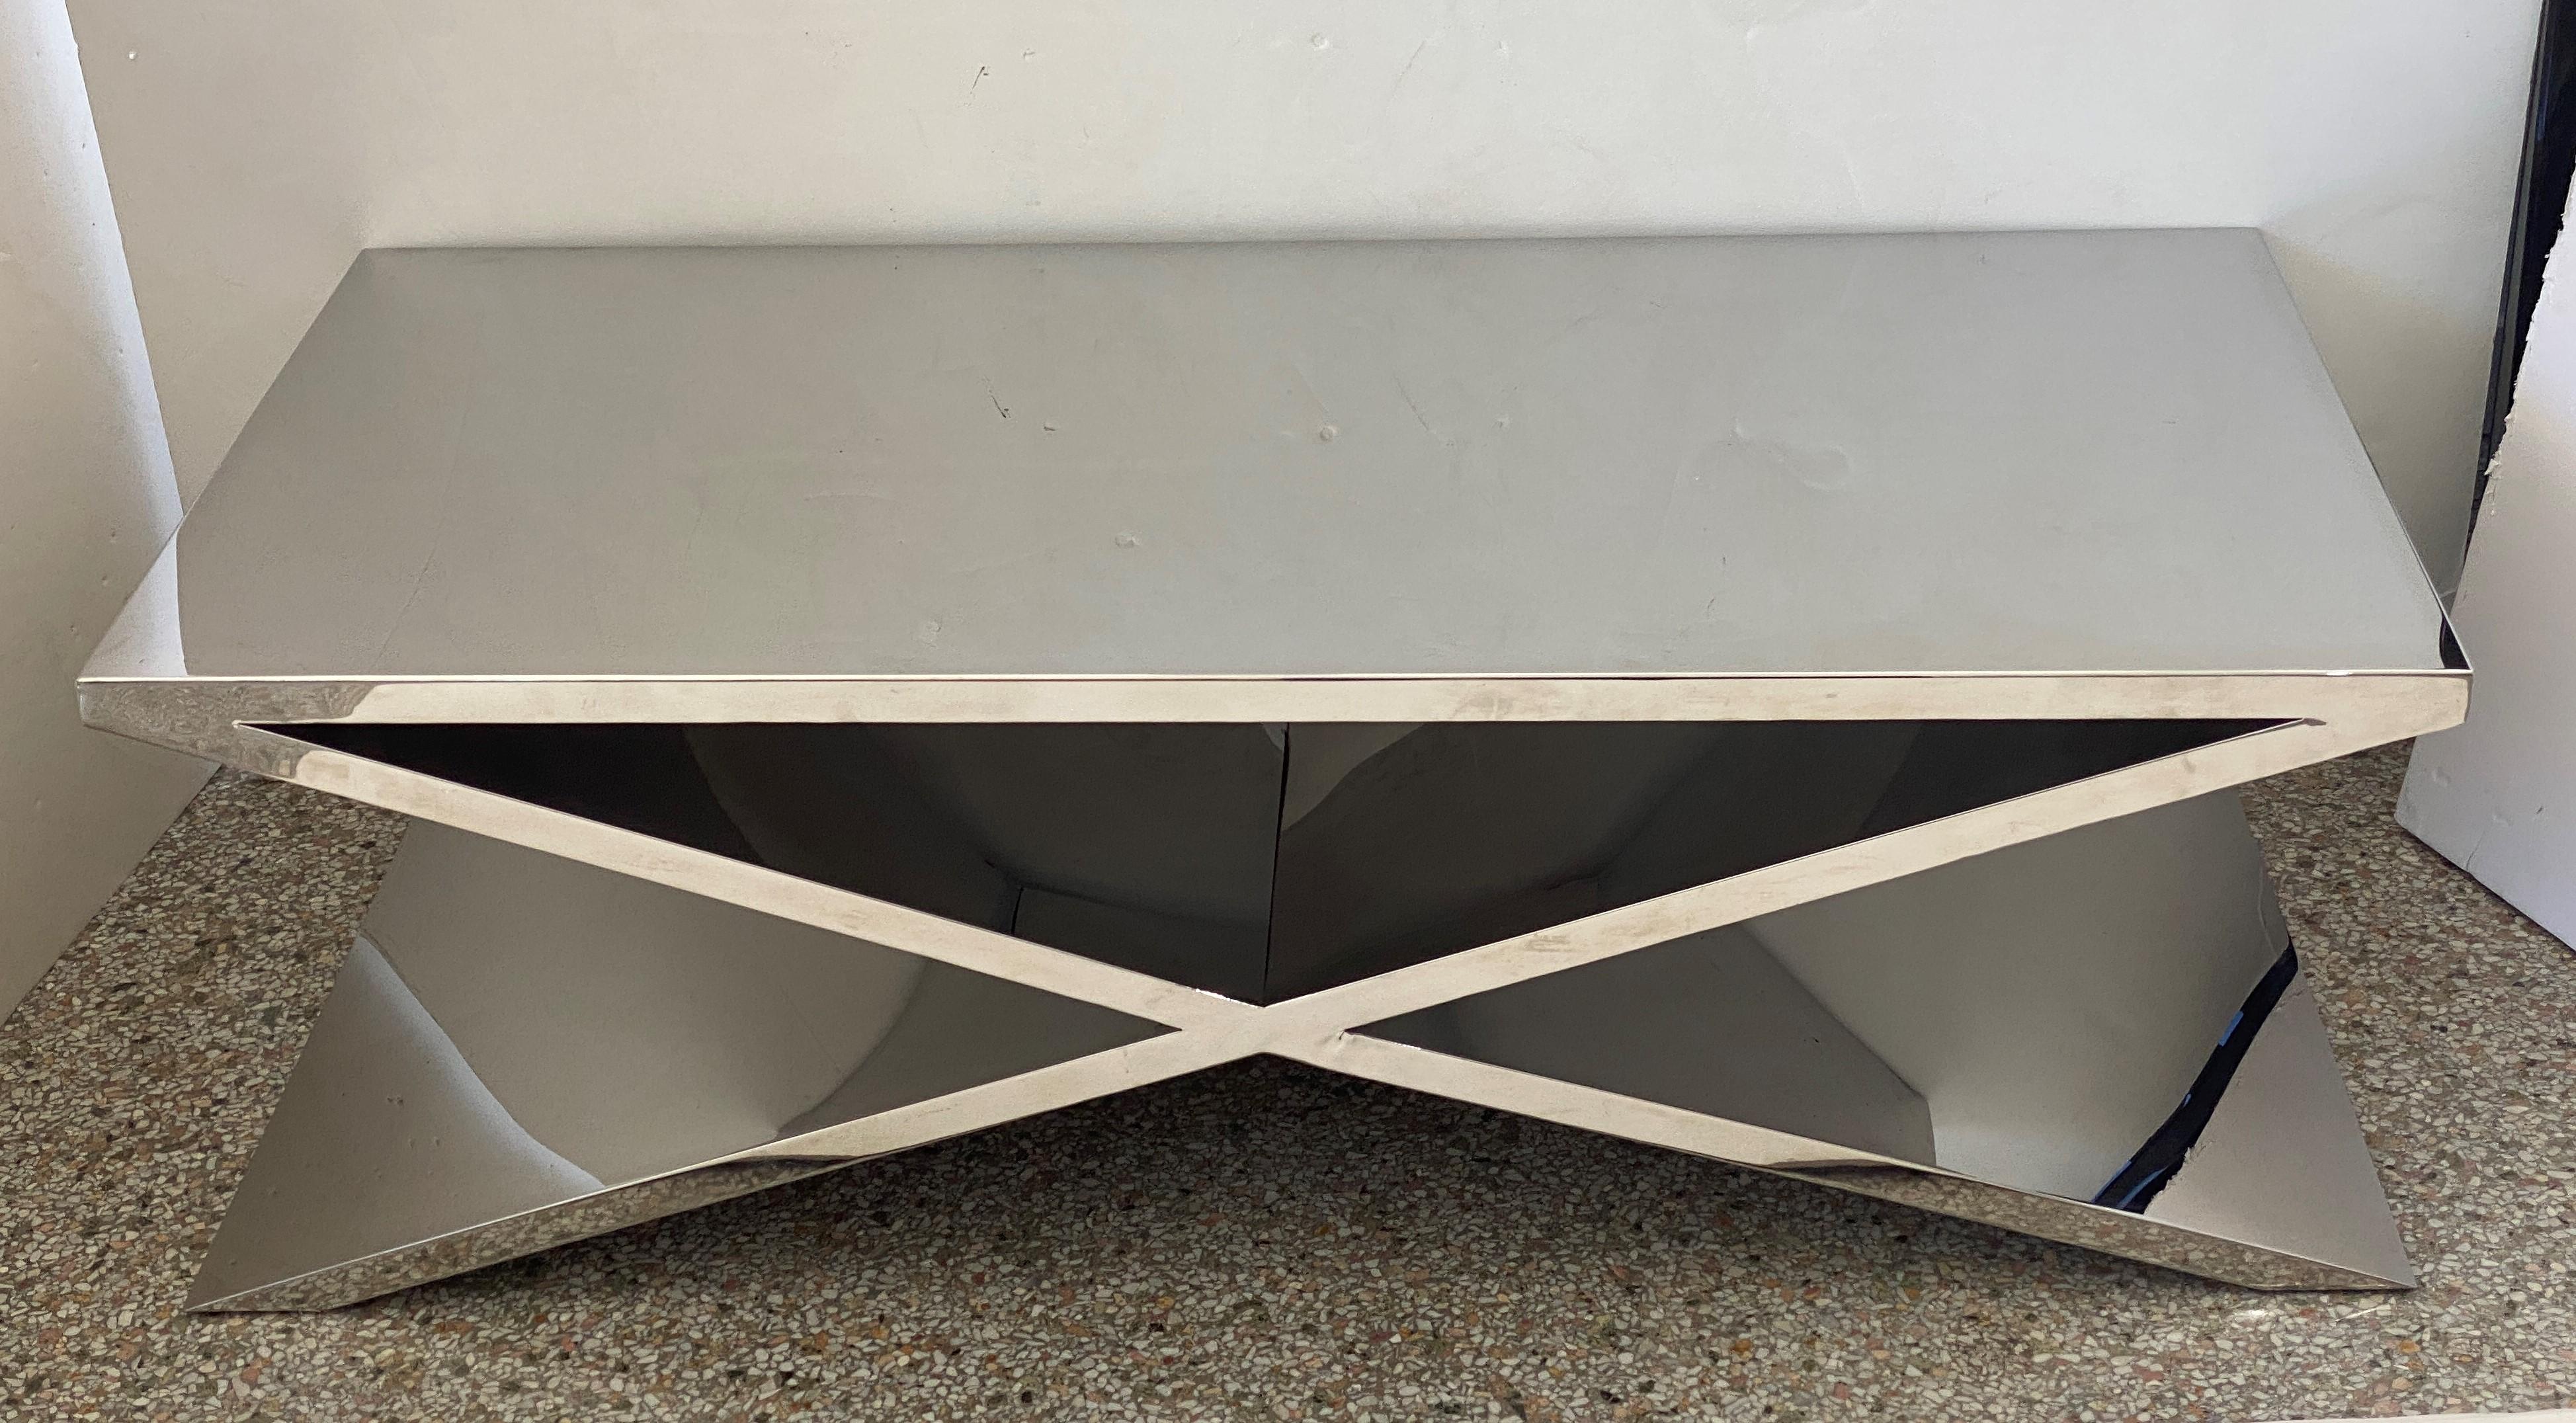 This stylish and substantial X-form polished stainless steel cocktail table was acquired from a Palm Beach yacht and thus it has a substantial weight of 100-200 lbs (guesstimate) to remain in place upon the open sea. 

Note: The scratches on the top